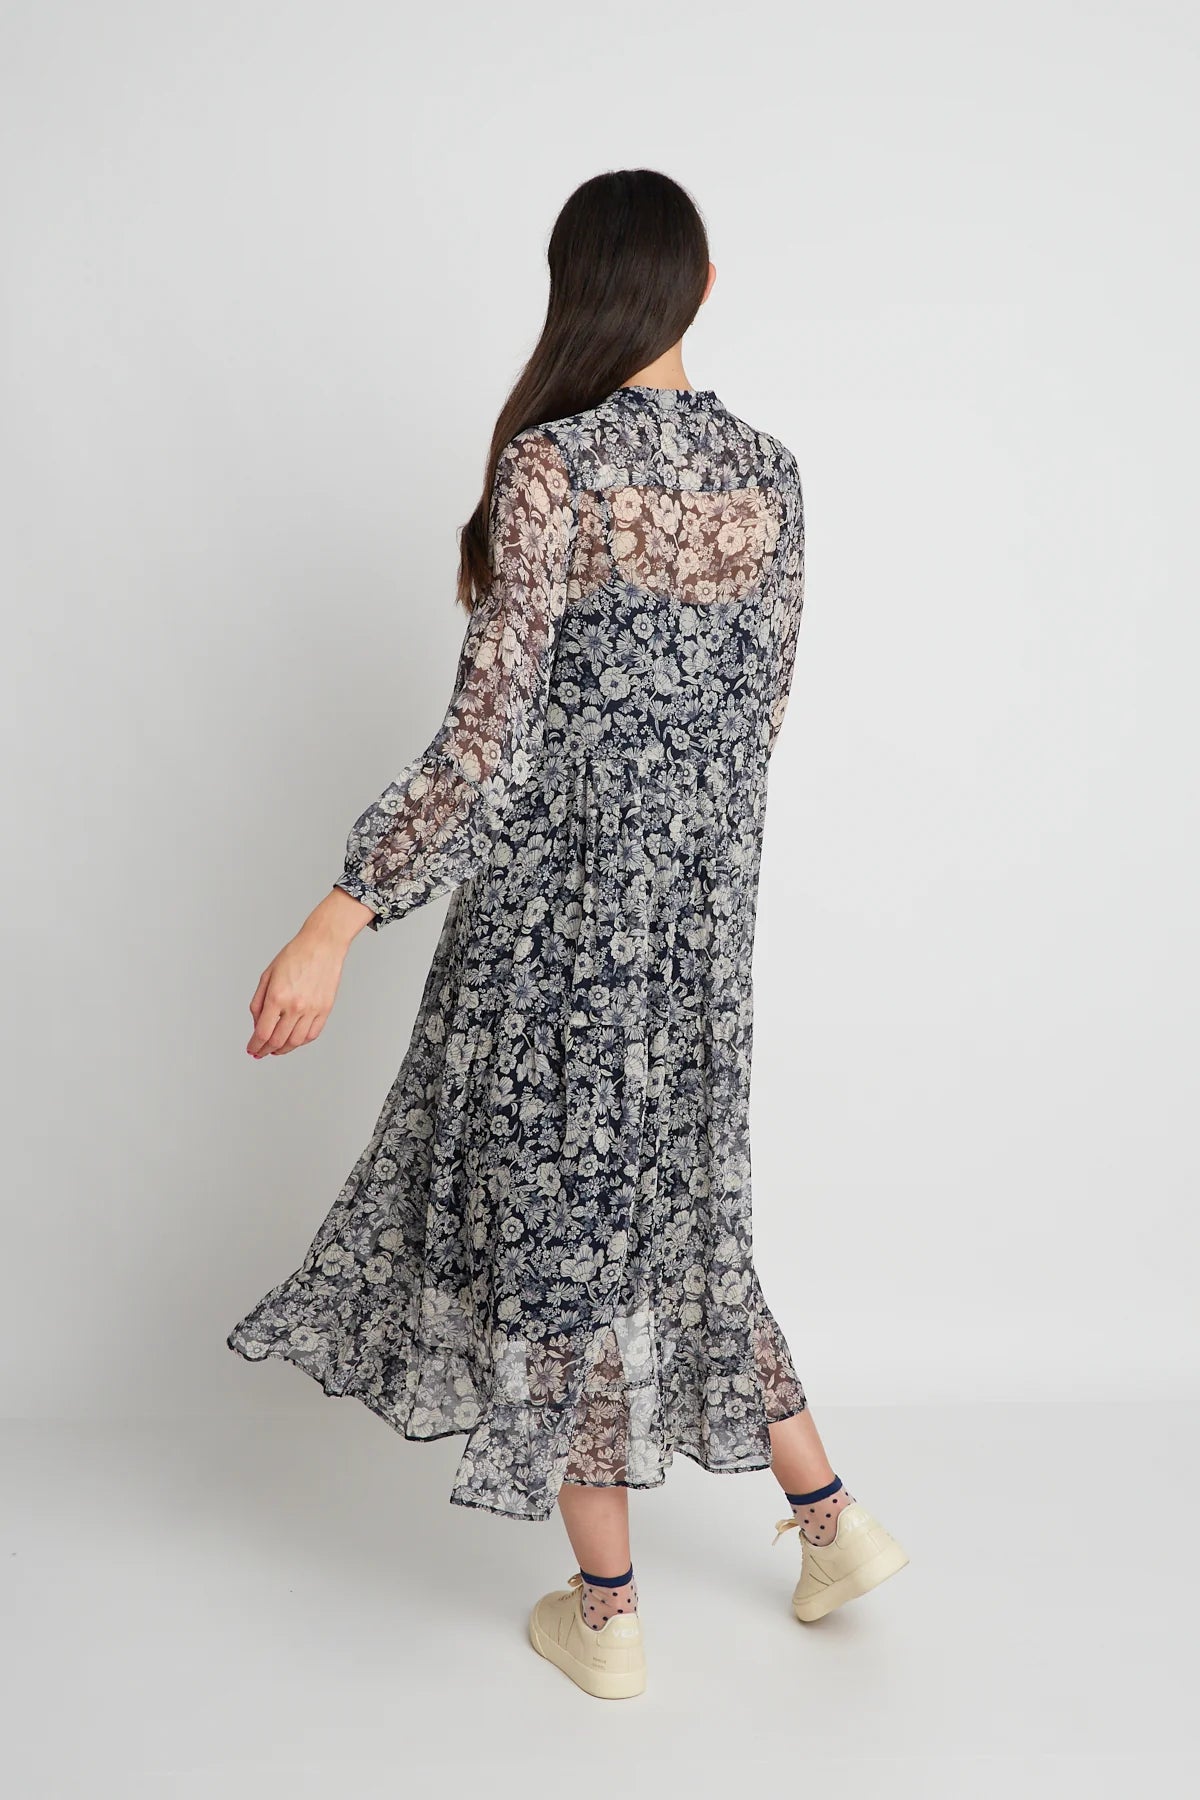 twenty-seven names | The Very Thought of You Dress | Navy Stencil Floral | Palm Boutique